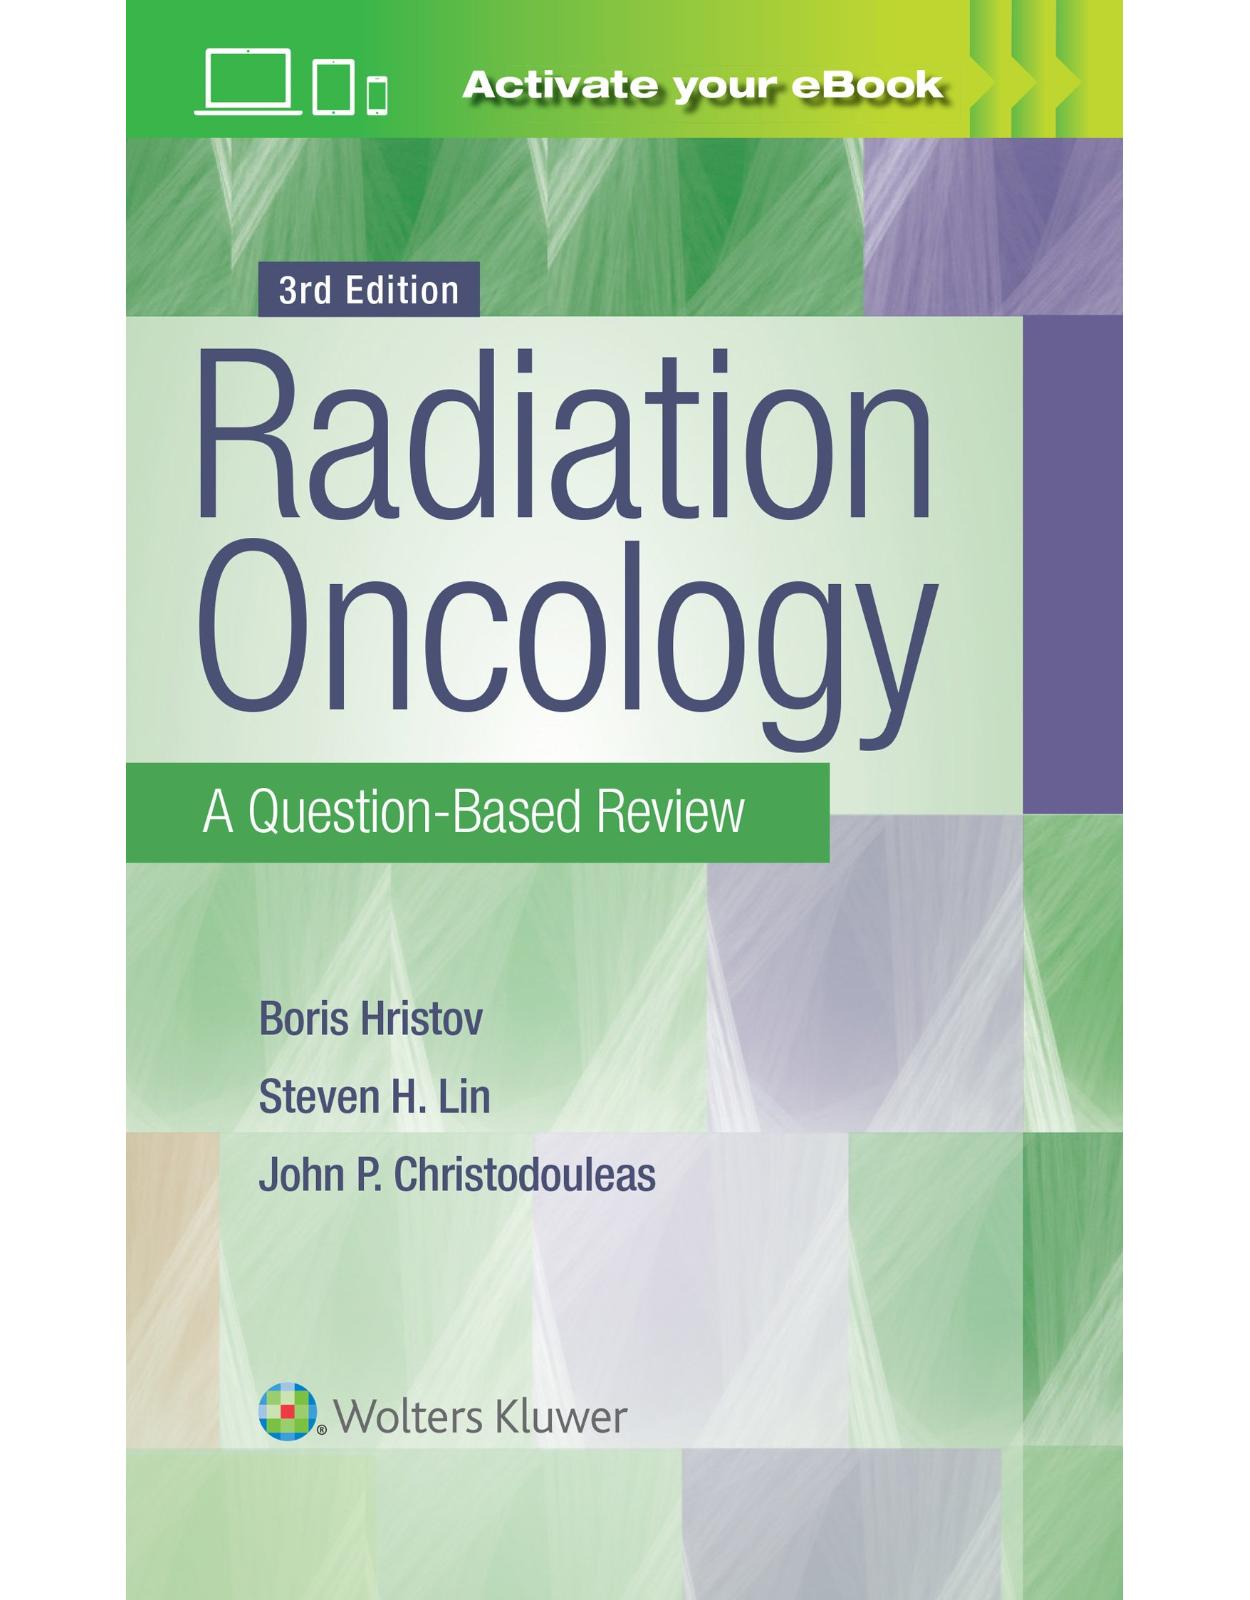 Radiation Oncology: A Question-Based Review, Third edition